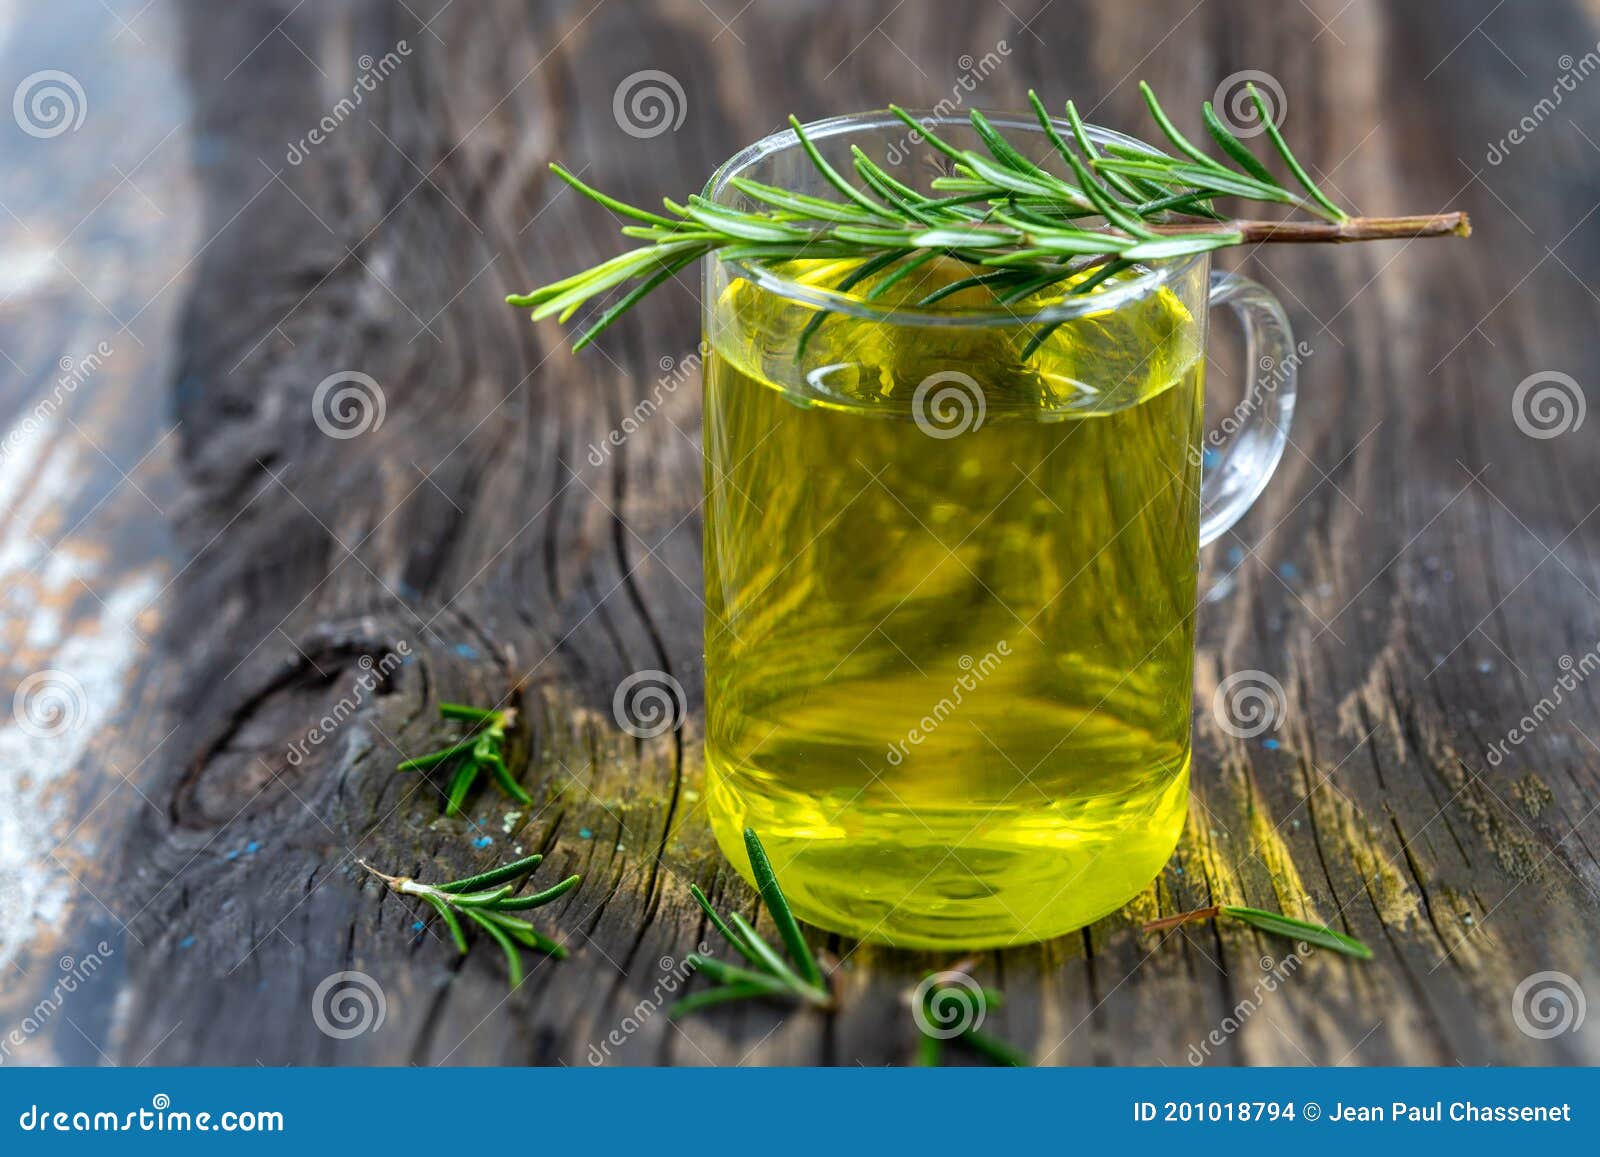 herbal tea.rosemary infusion in a glass cup.rosmarinus officinalis.naturopathy.